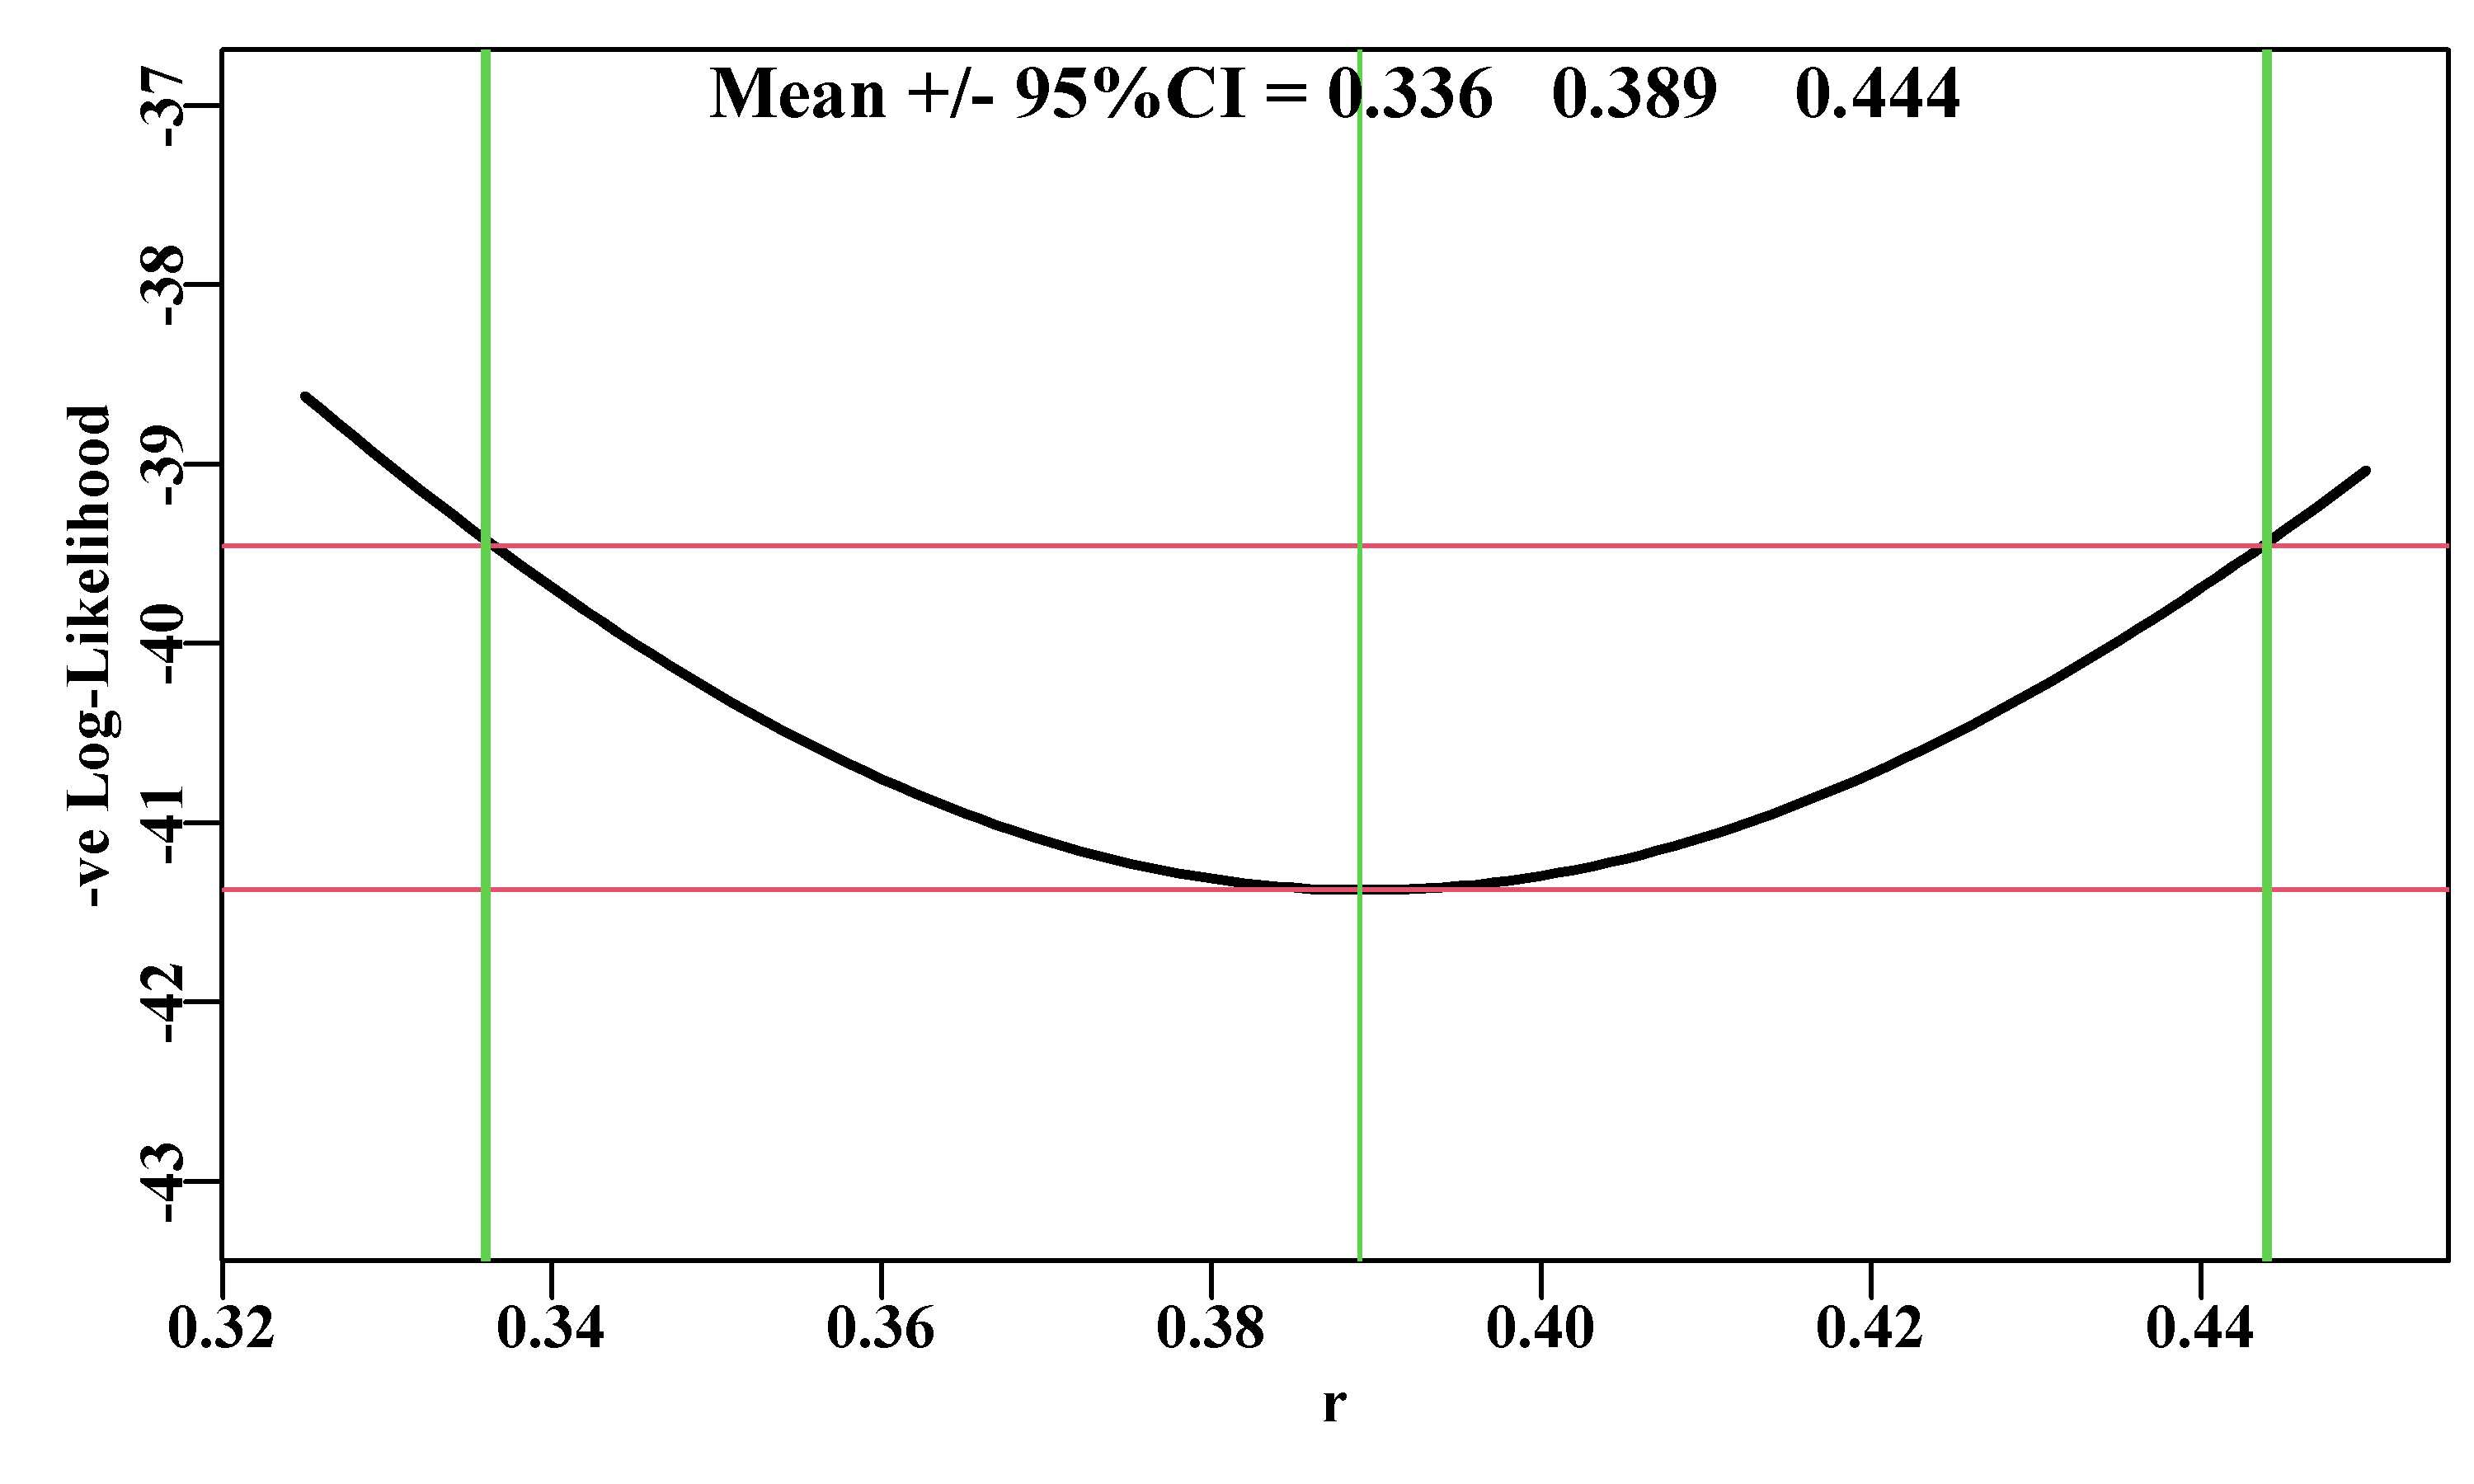 A likelihood profile for the r parameter from the Schaefer surplus production model fitted to the abdat data set. The horizontal solid lines are the minimum and the minimum minus 1.92 (95% level for \(\chi^2\) with 1 degree of freedom, see text). The outer vertical lines are the approximate 95% confidence bounds around the central mean of 0.389.